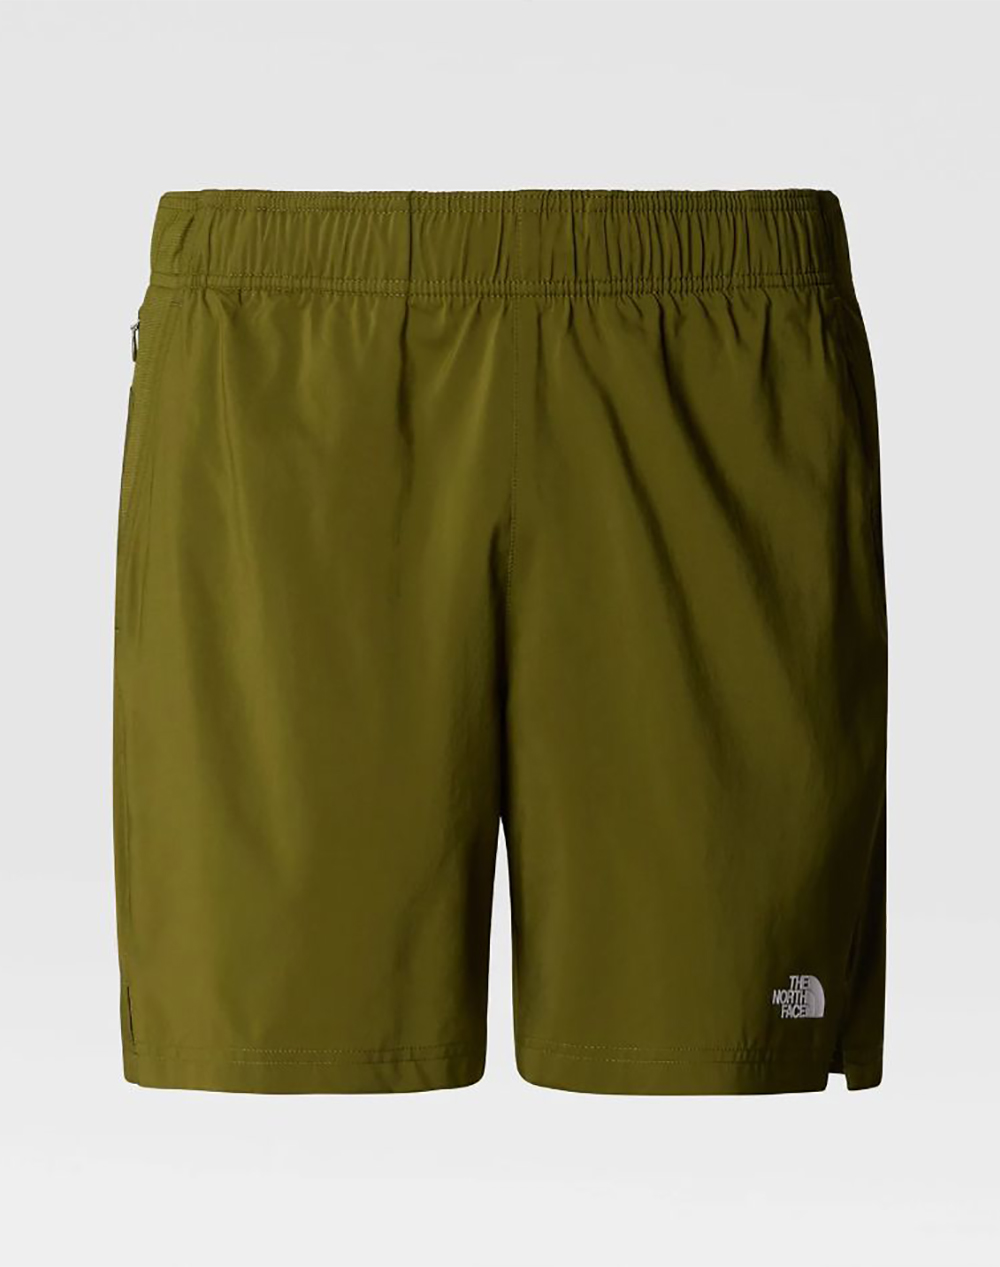 THE NORTH FACE M 24/7 7IN SHORT NF0A3O1B-NFPIB Olive